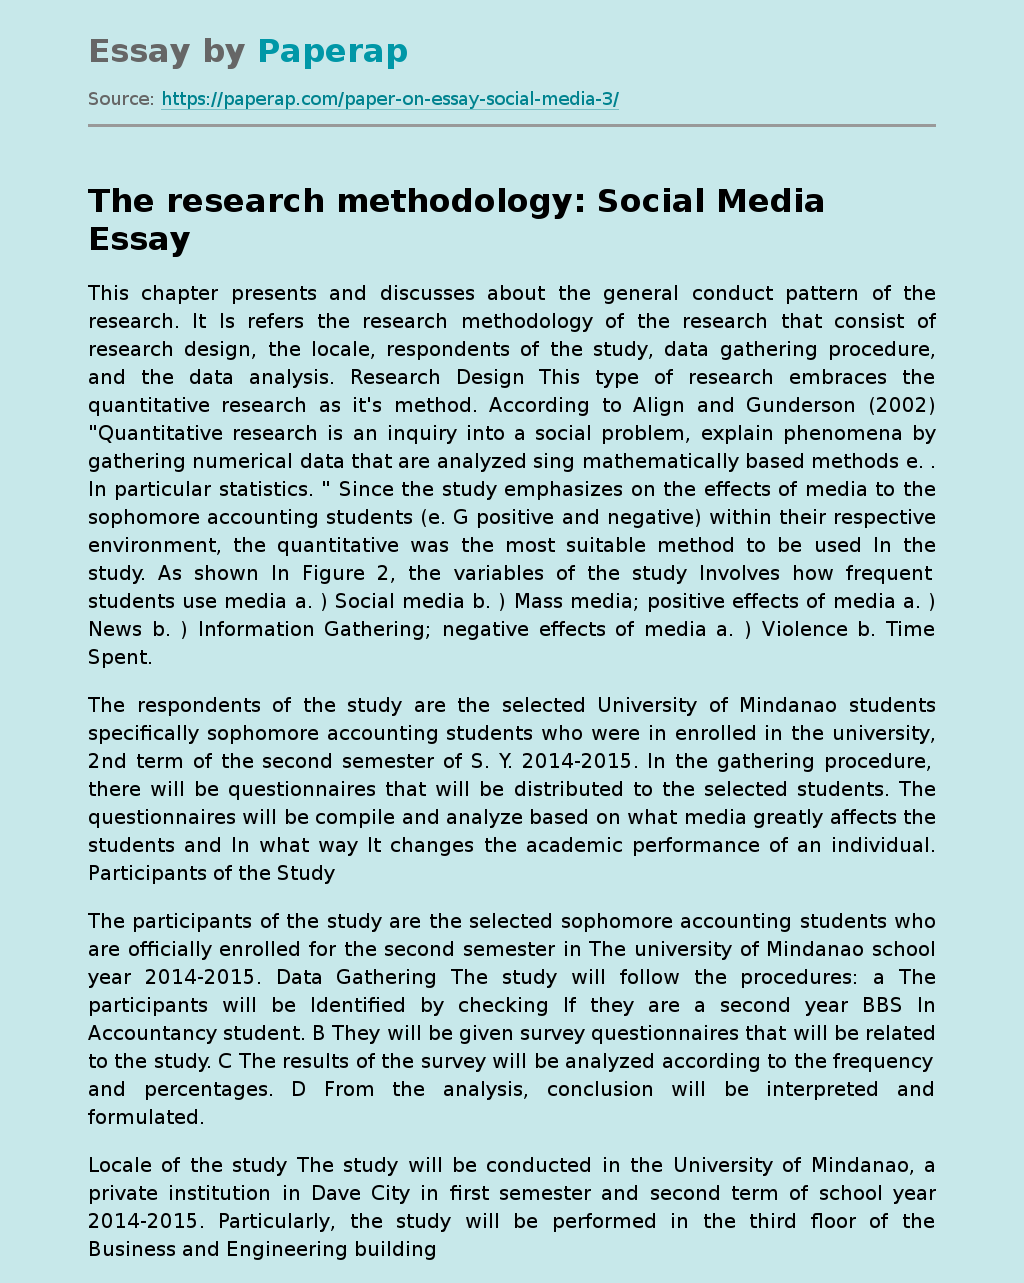 chapter 3 methodology about social media